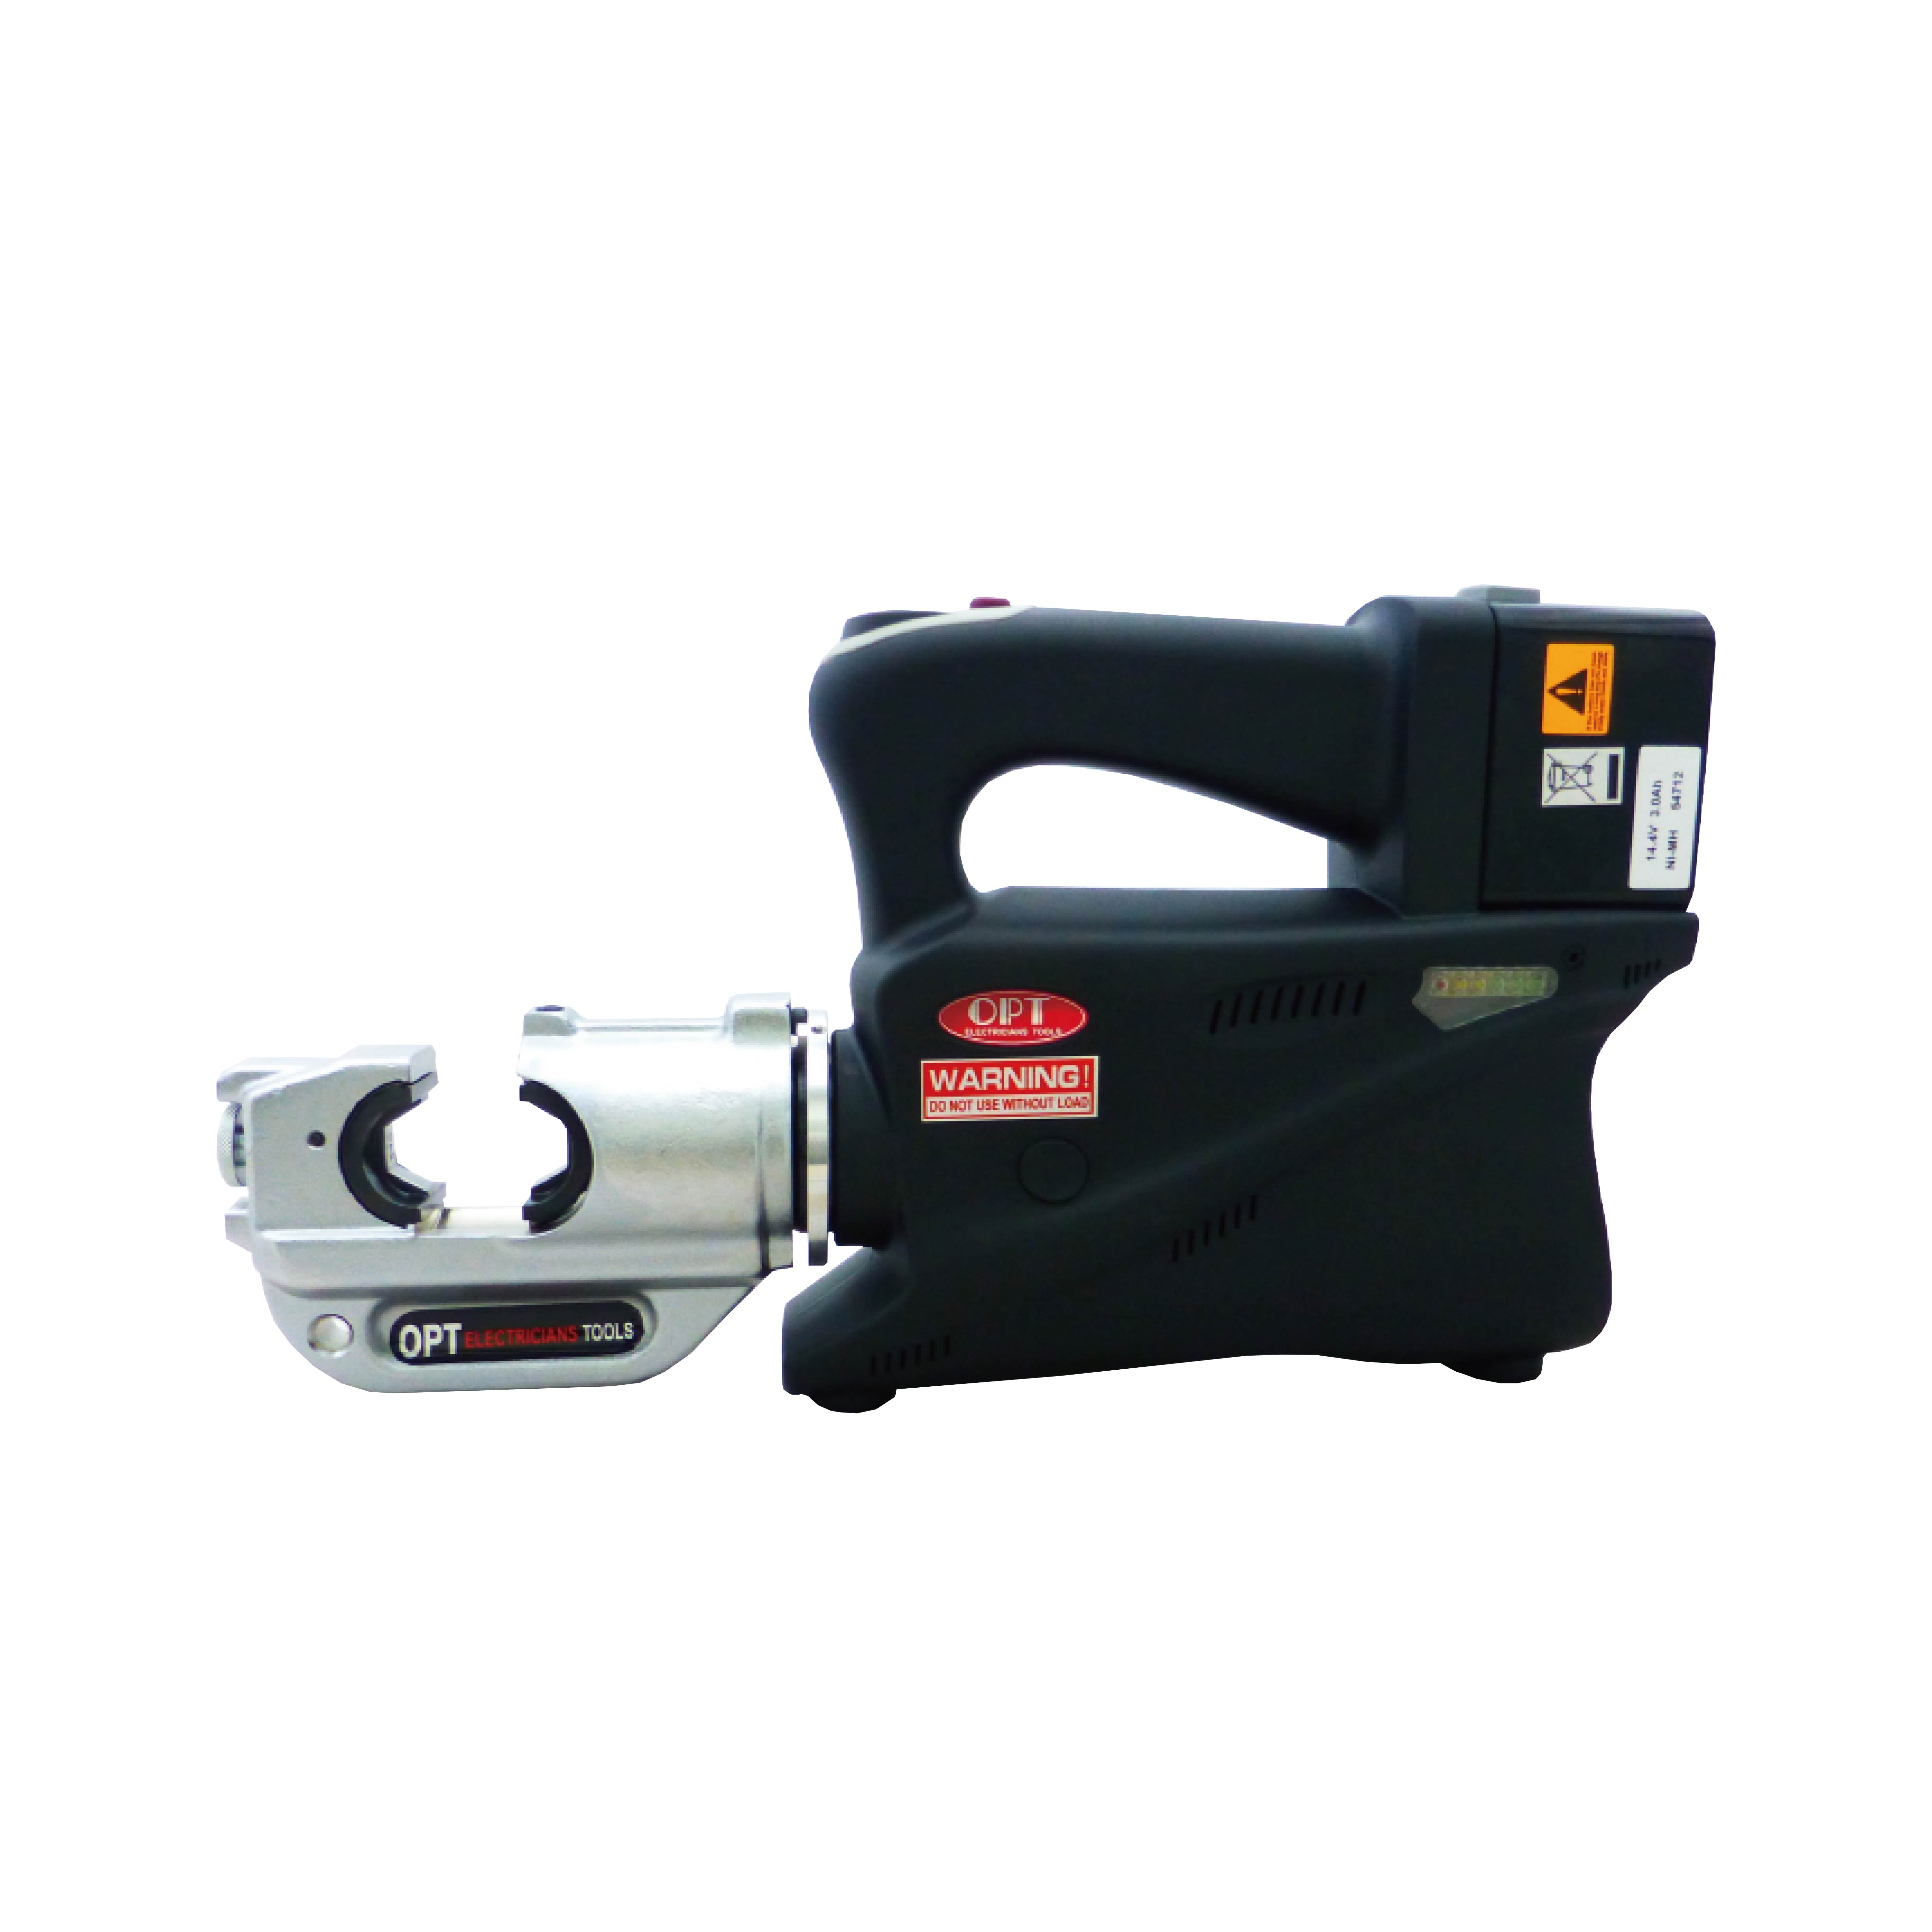 EPL-300 CORDLESS HYDRAULIC CRIMPING TOOLS-EPL-300